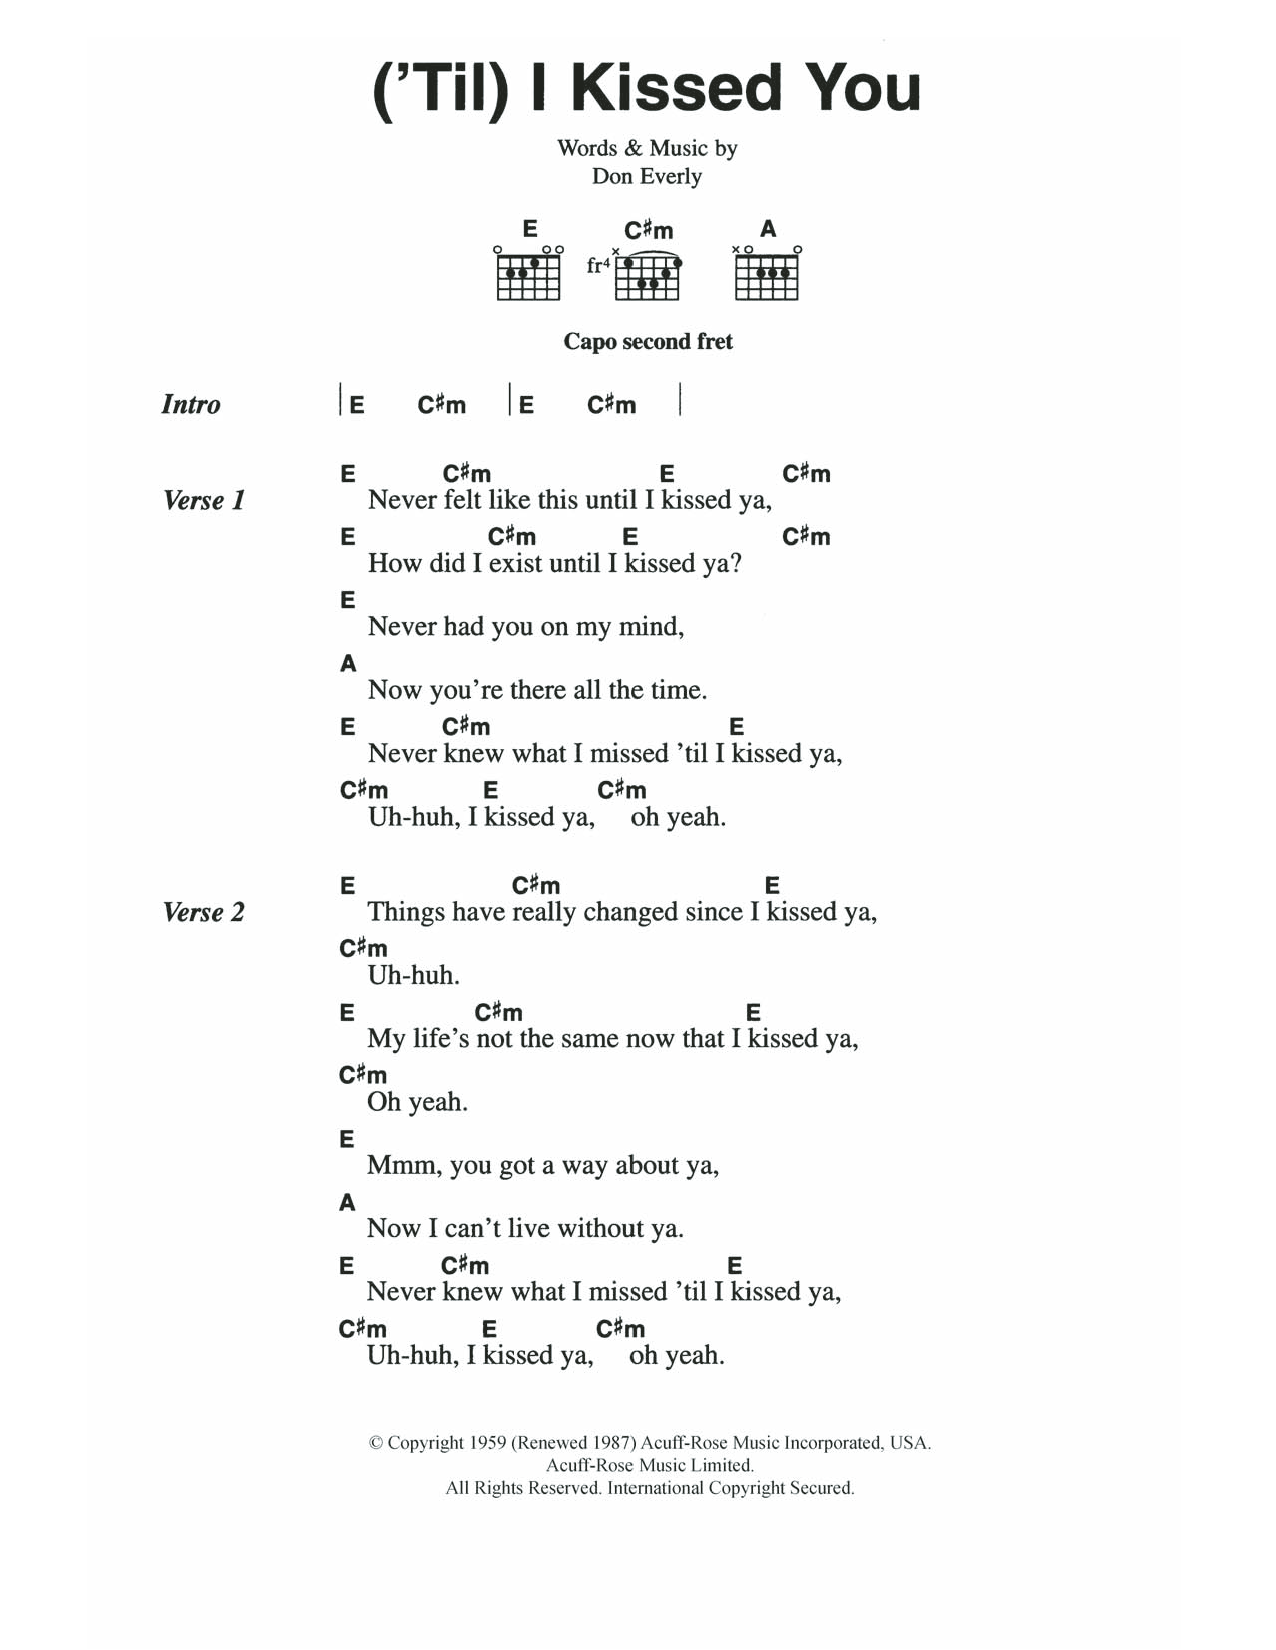 Download The Everly Brothers ('Til) I Kissed You Sheet Music